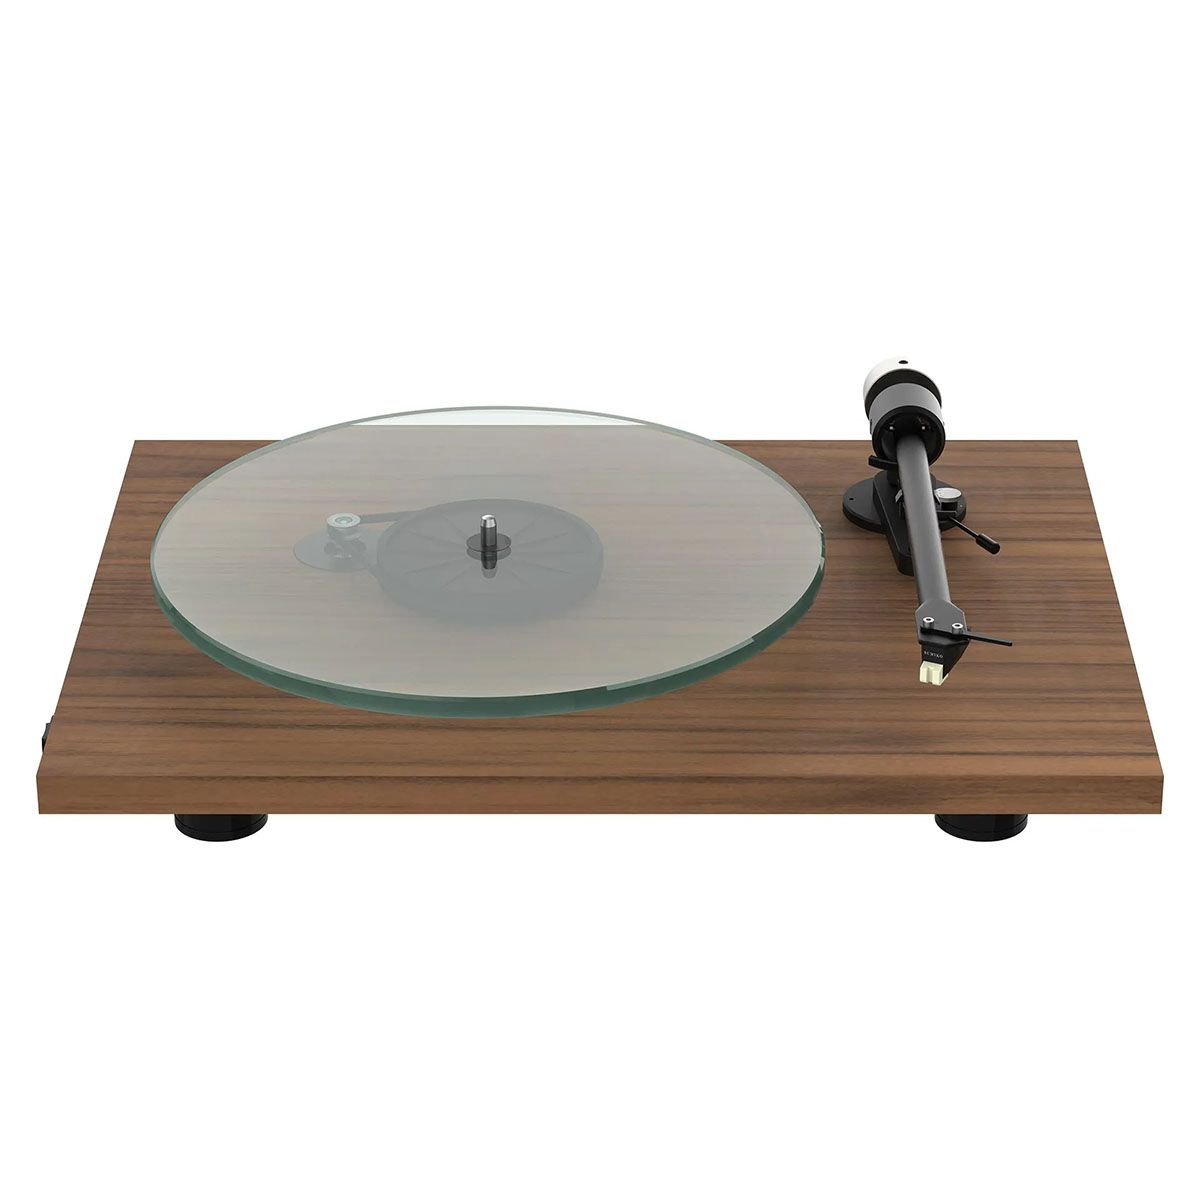 Pro-Ject T2 Hi-Fi Turntable - Satin Walnut - angled front view